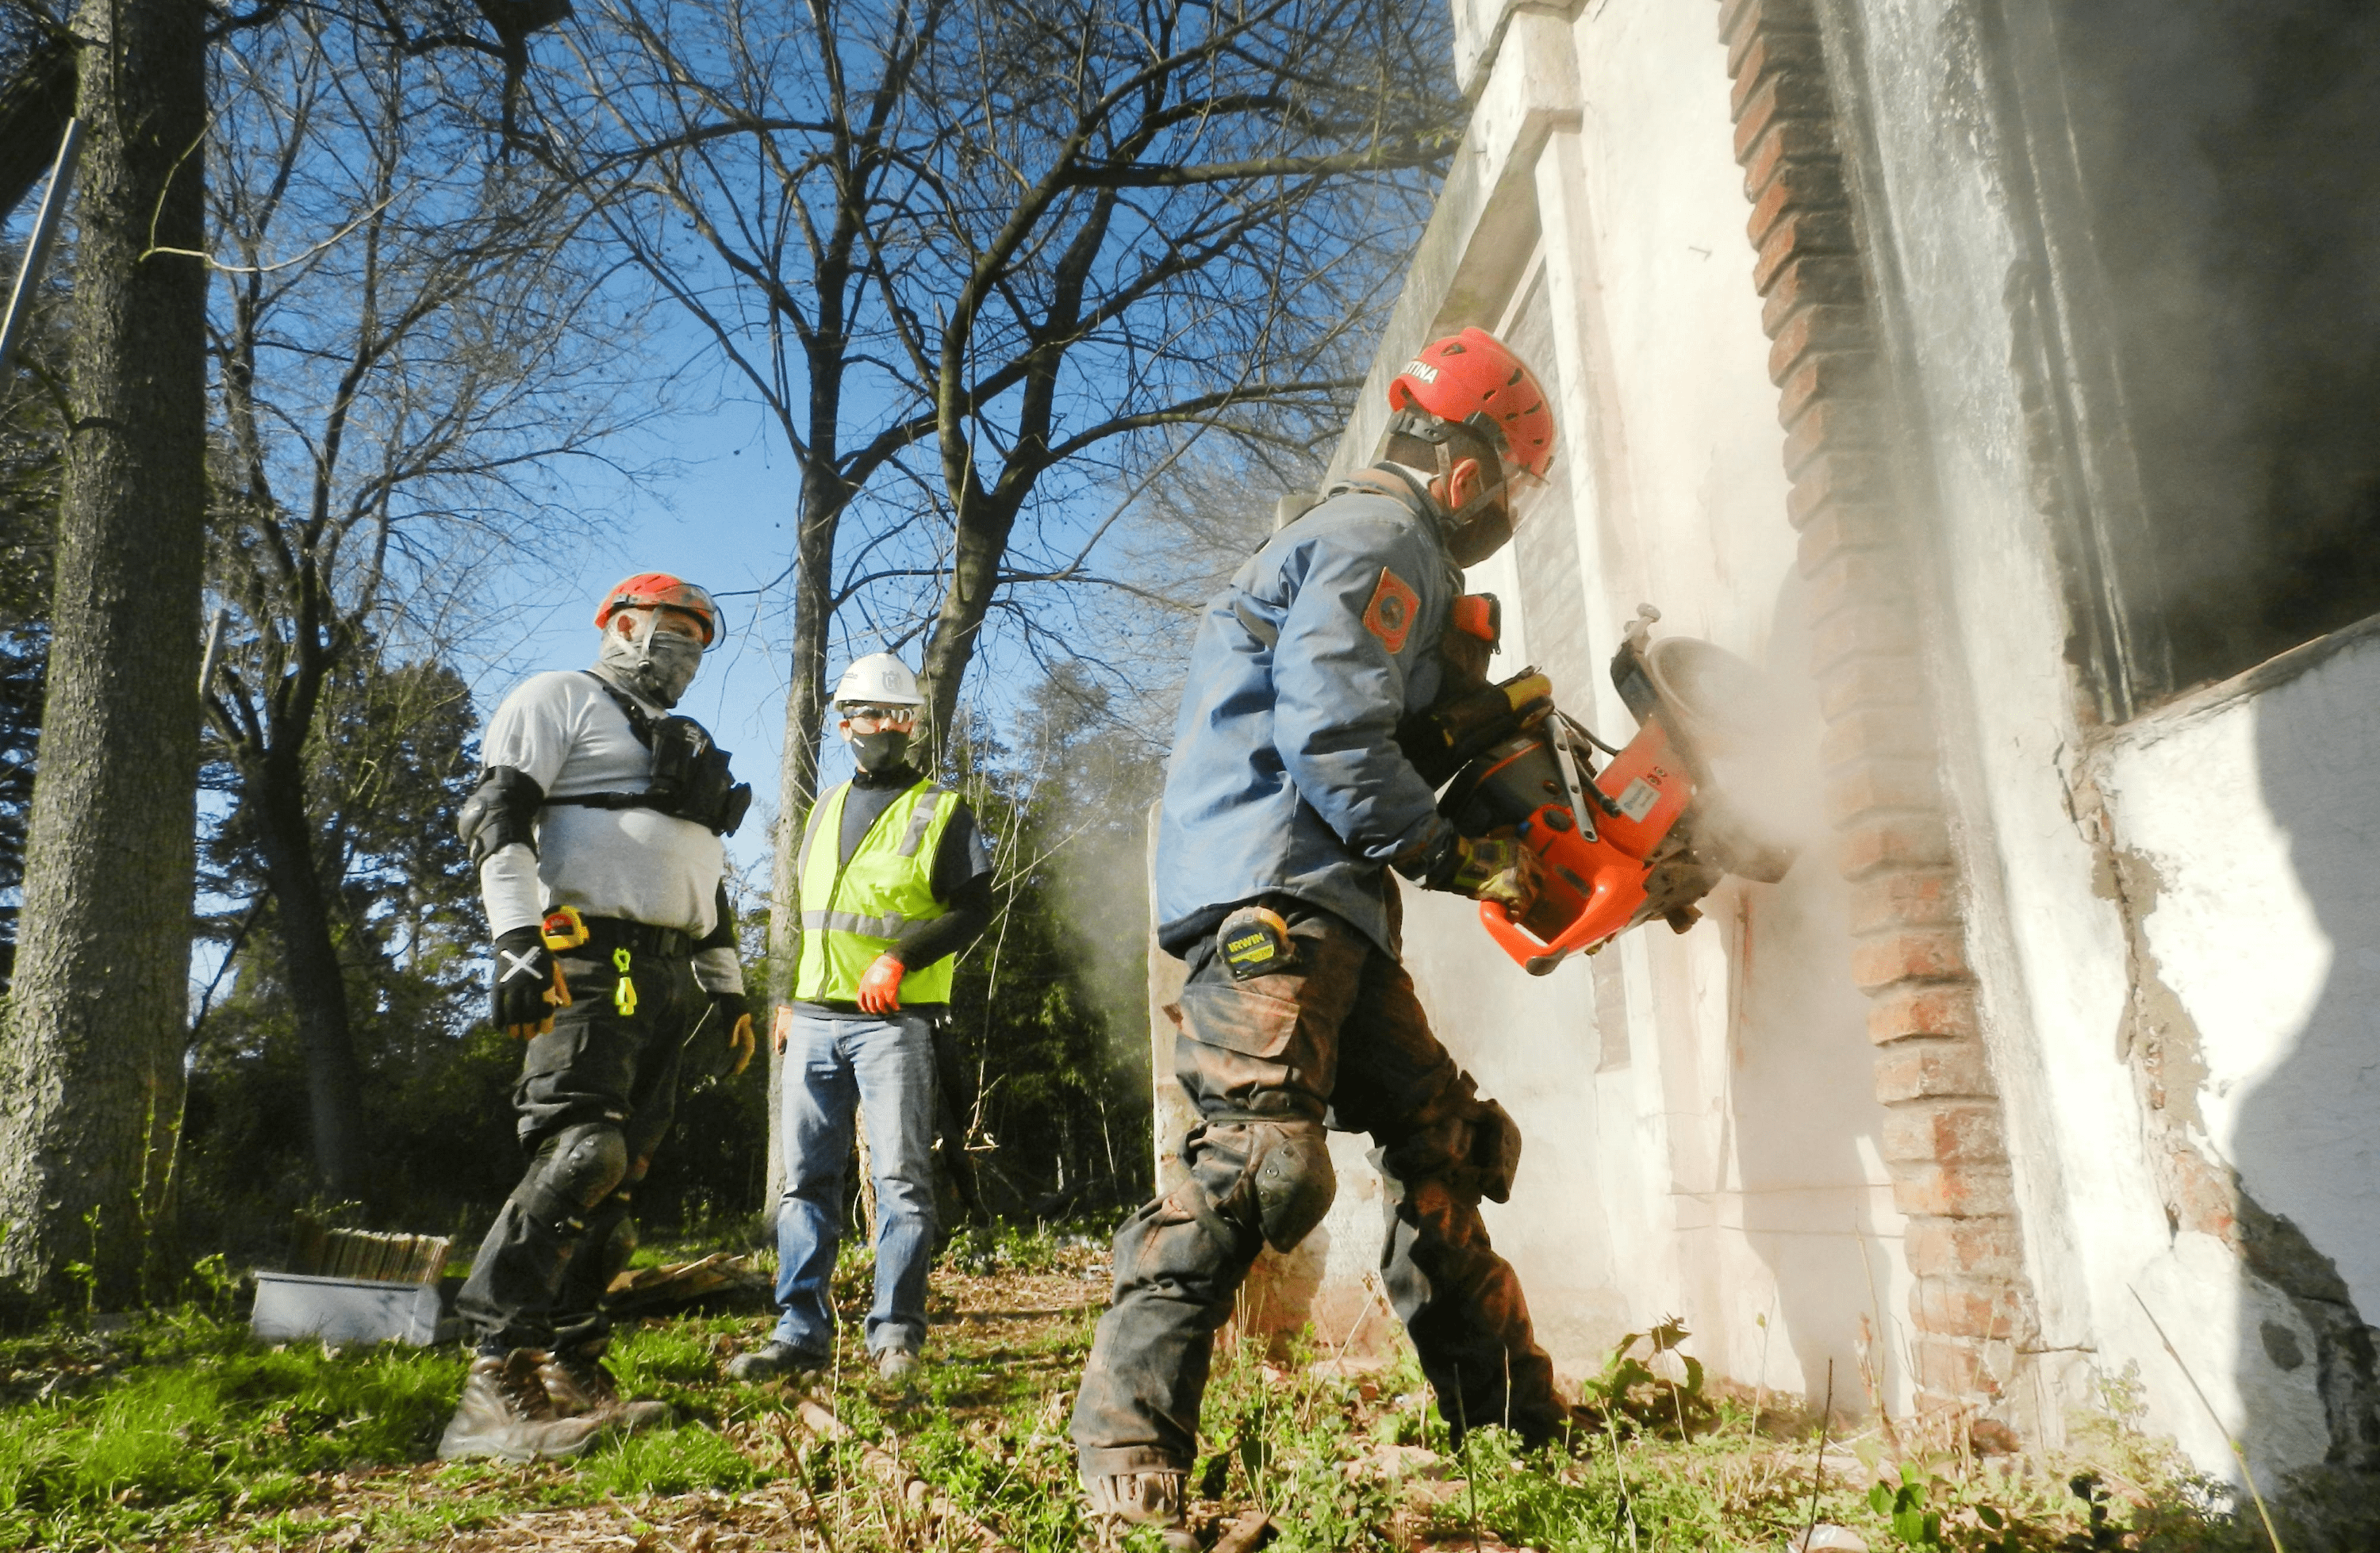 Demolition workers using a tool to tear down an exterior wall